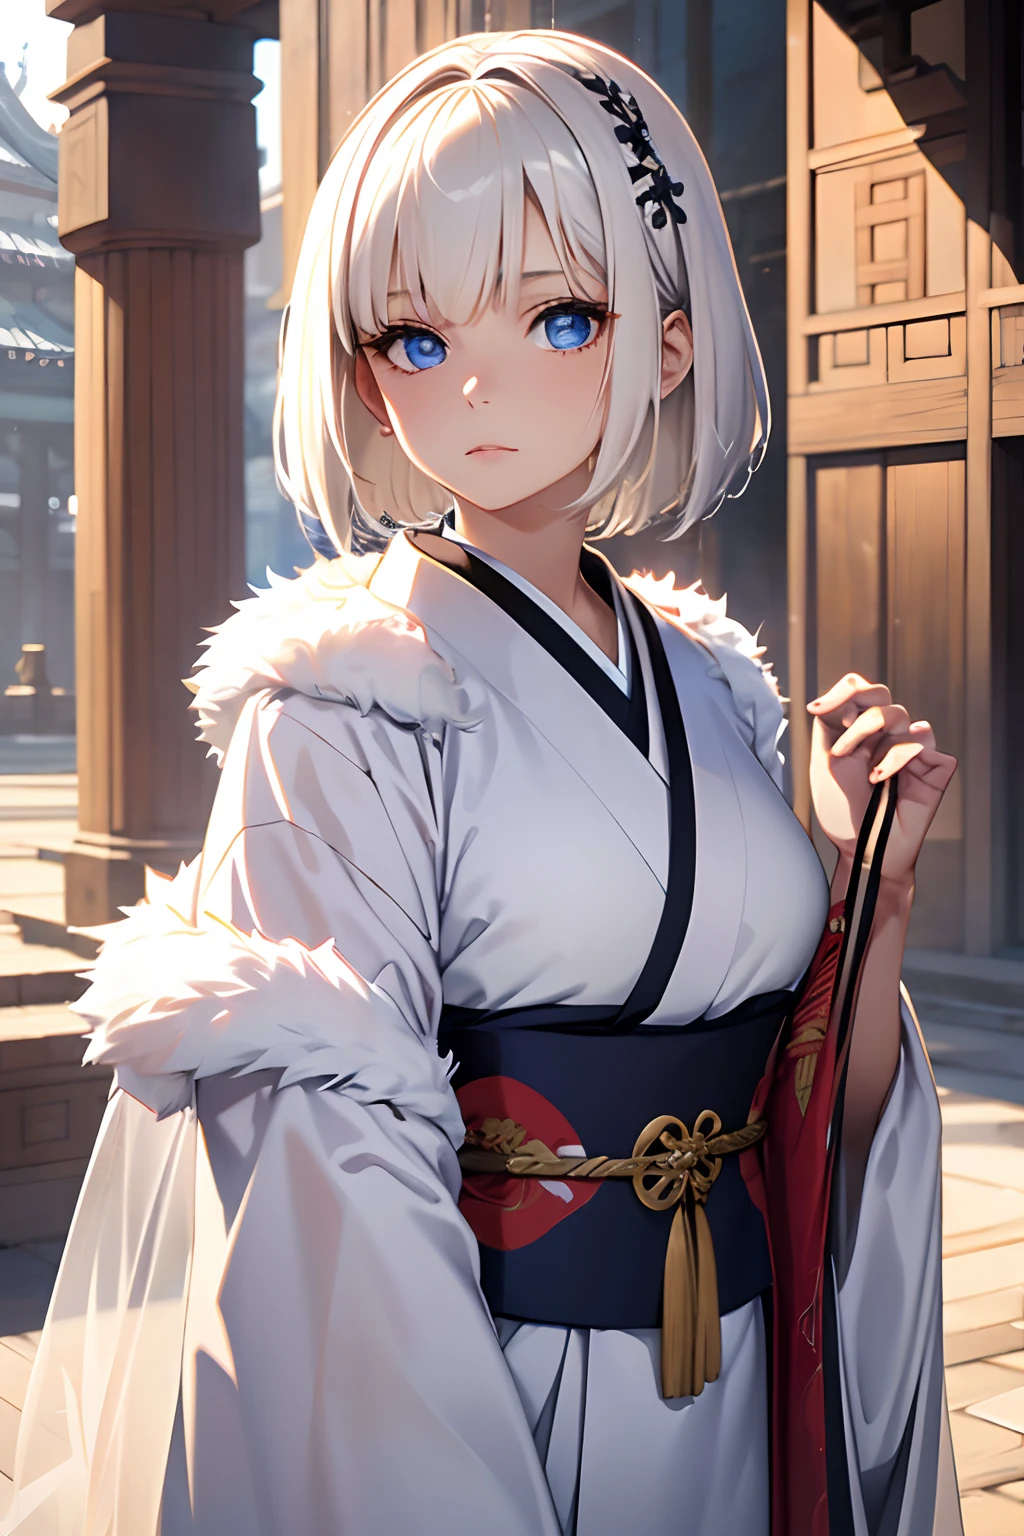 Bruleukun, Best Quality, portlate, Original outfit, Hanfu, clear details, masutepiece, Best Quality, clear details, 1girl in, palace background, Blue eyes, Platinum Blonde Hair, Short hair, Big eyes, White kimono, Fur cloak without emotional expression